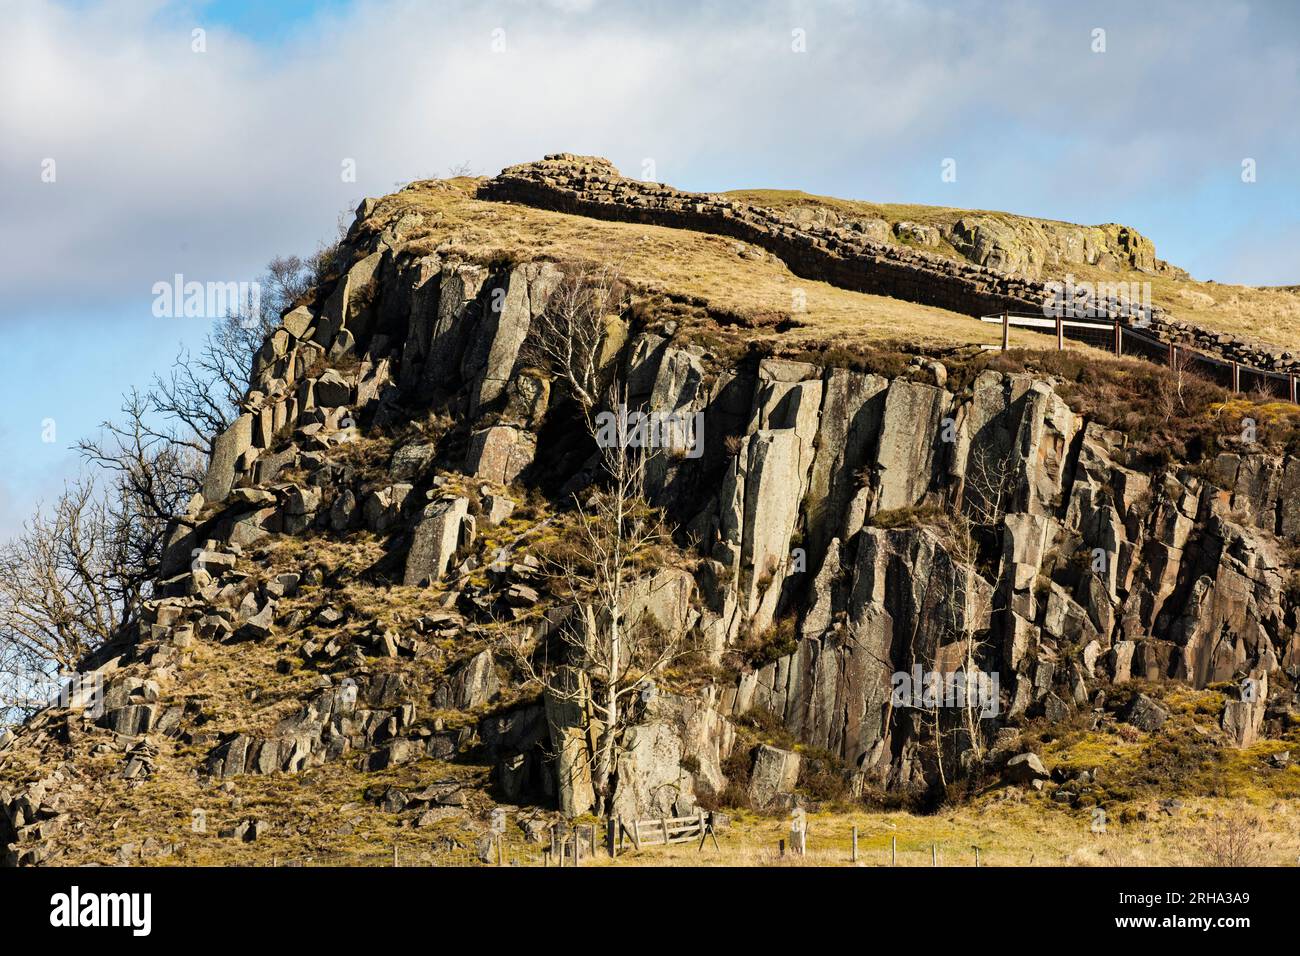 Hadrians Wall follows the line of Walltown Crags, part of the Whin Sill dolerite rocks near Greenhead, Northumberland Stock Photo